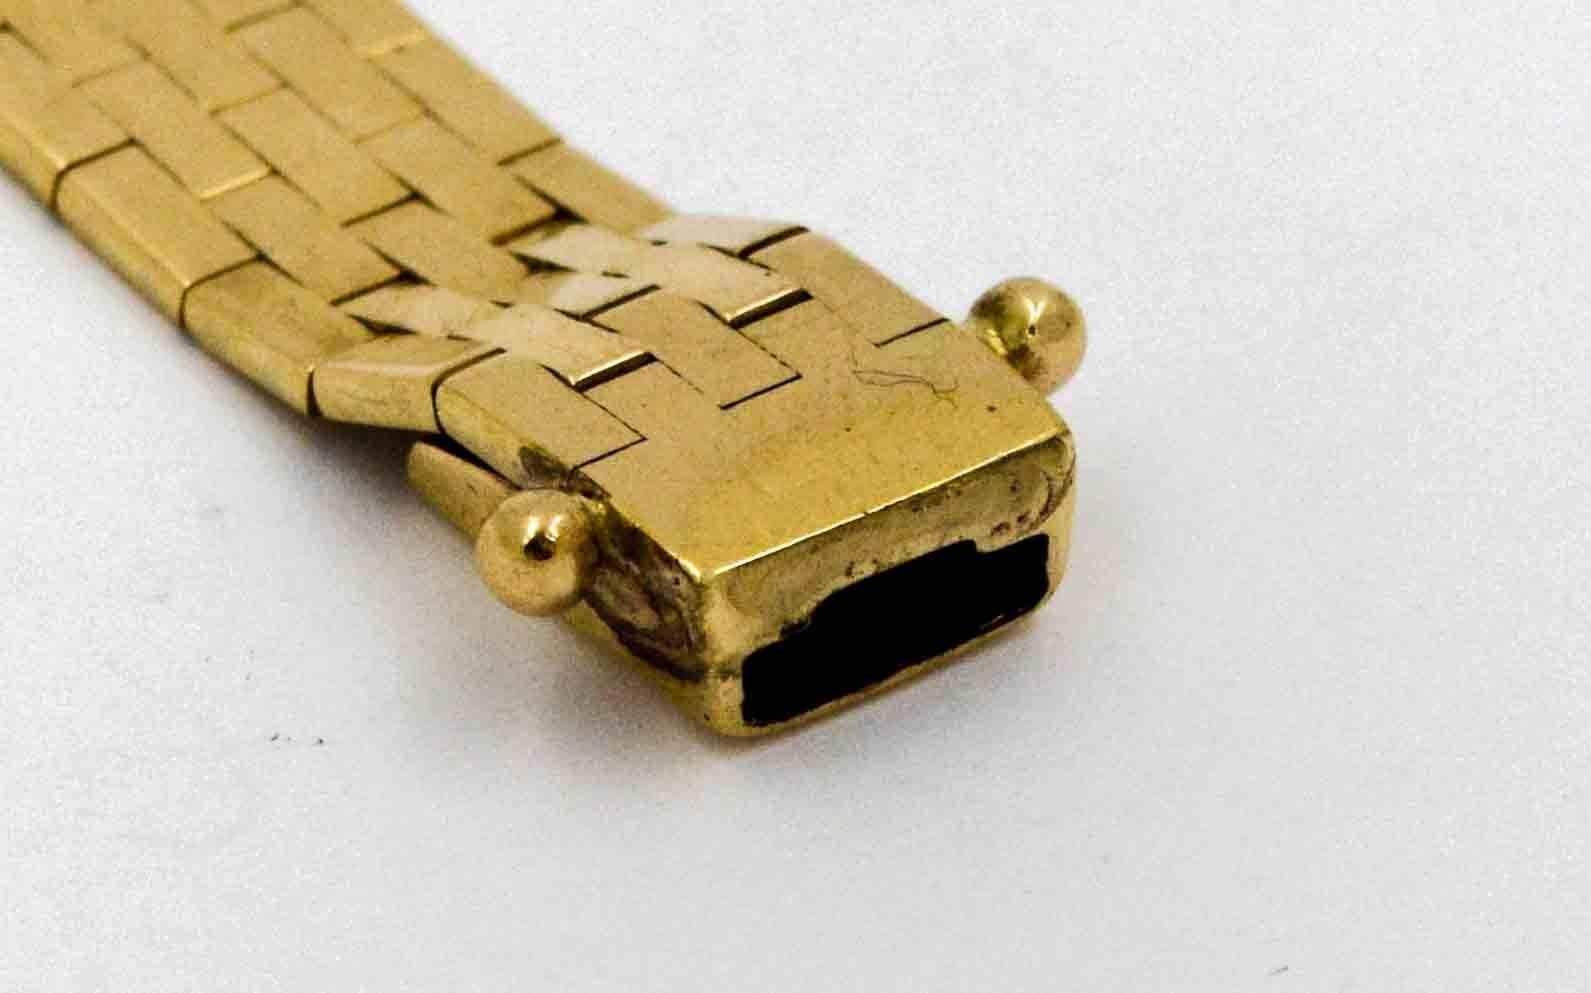 So rich, smooth and soft, this classic brick link bracelet is the definition of comfortable.  The piece measures 7.75 mm wide and 7 inches long.  The shiny gold bracelet is clasped with a box and tongue clasp.  The brick link bracelet has a high